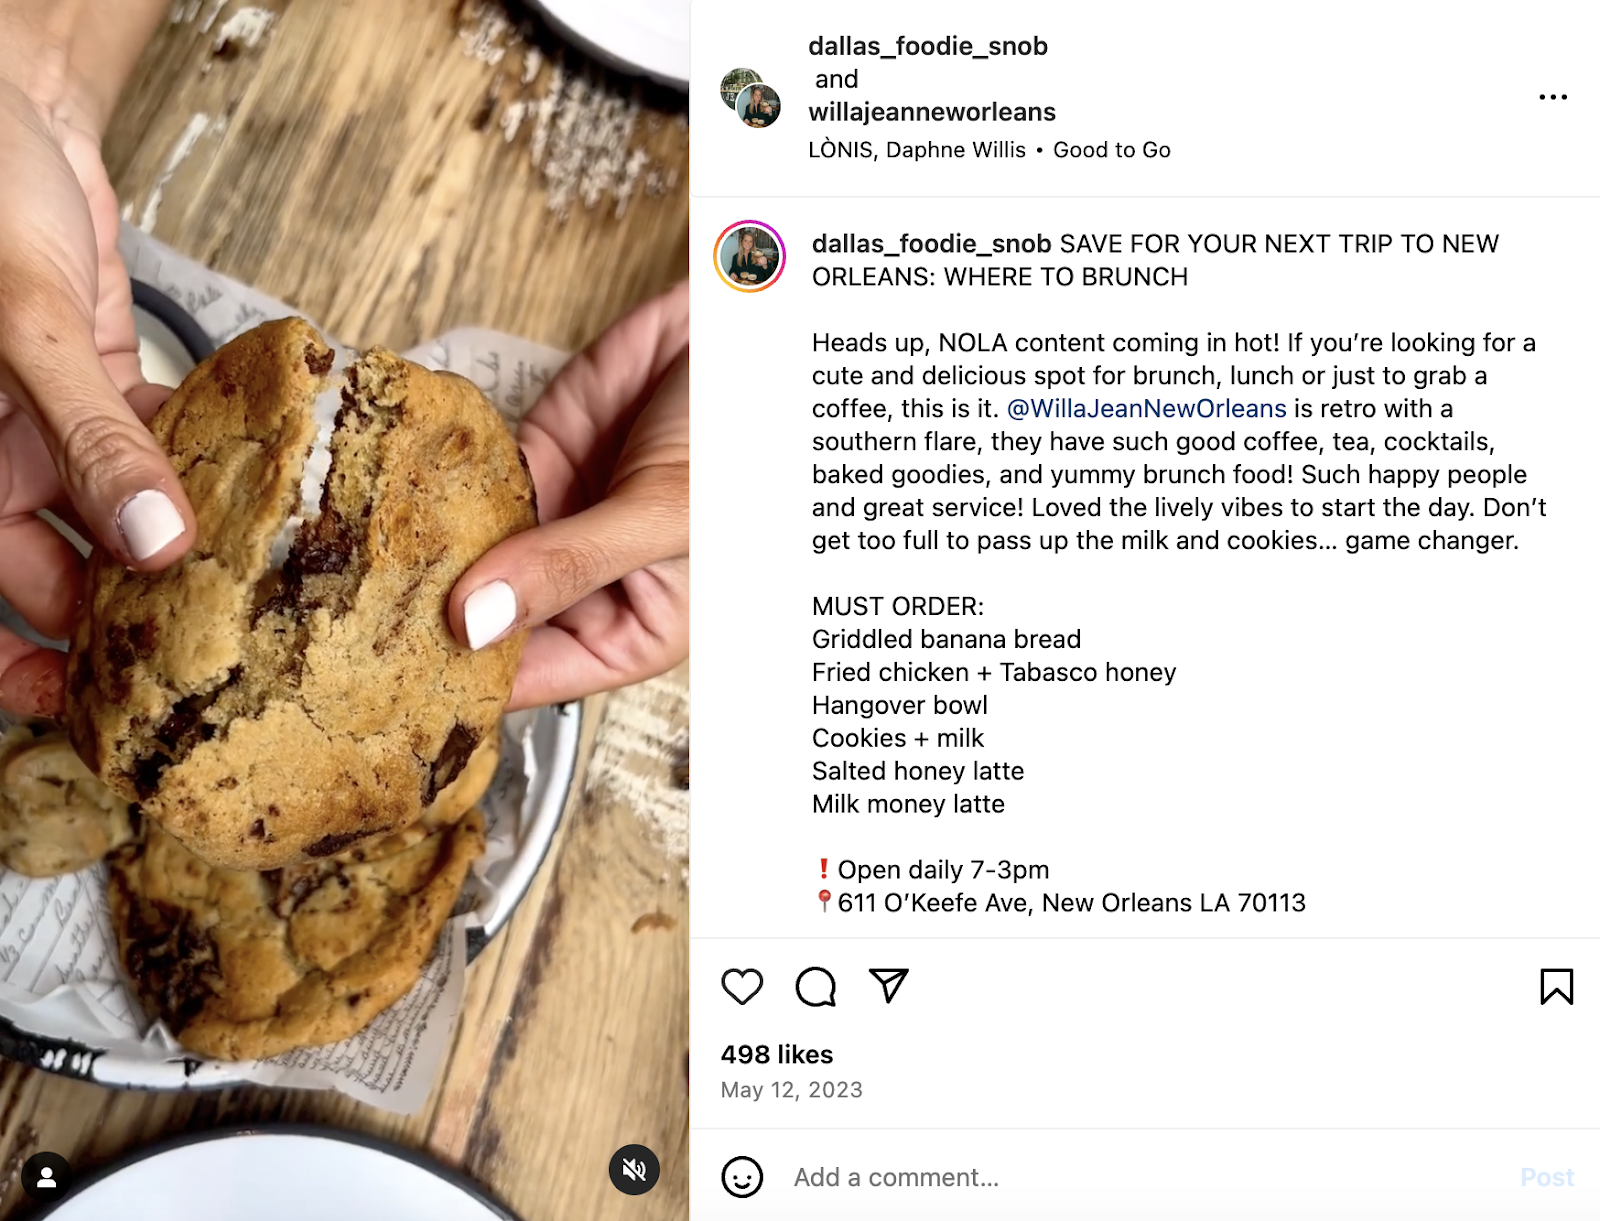 Creative restaurant marketing ideas: An influencer post that Willa Jean, a New Orleans restaurant, reshared on its Instagram page.